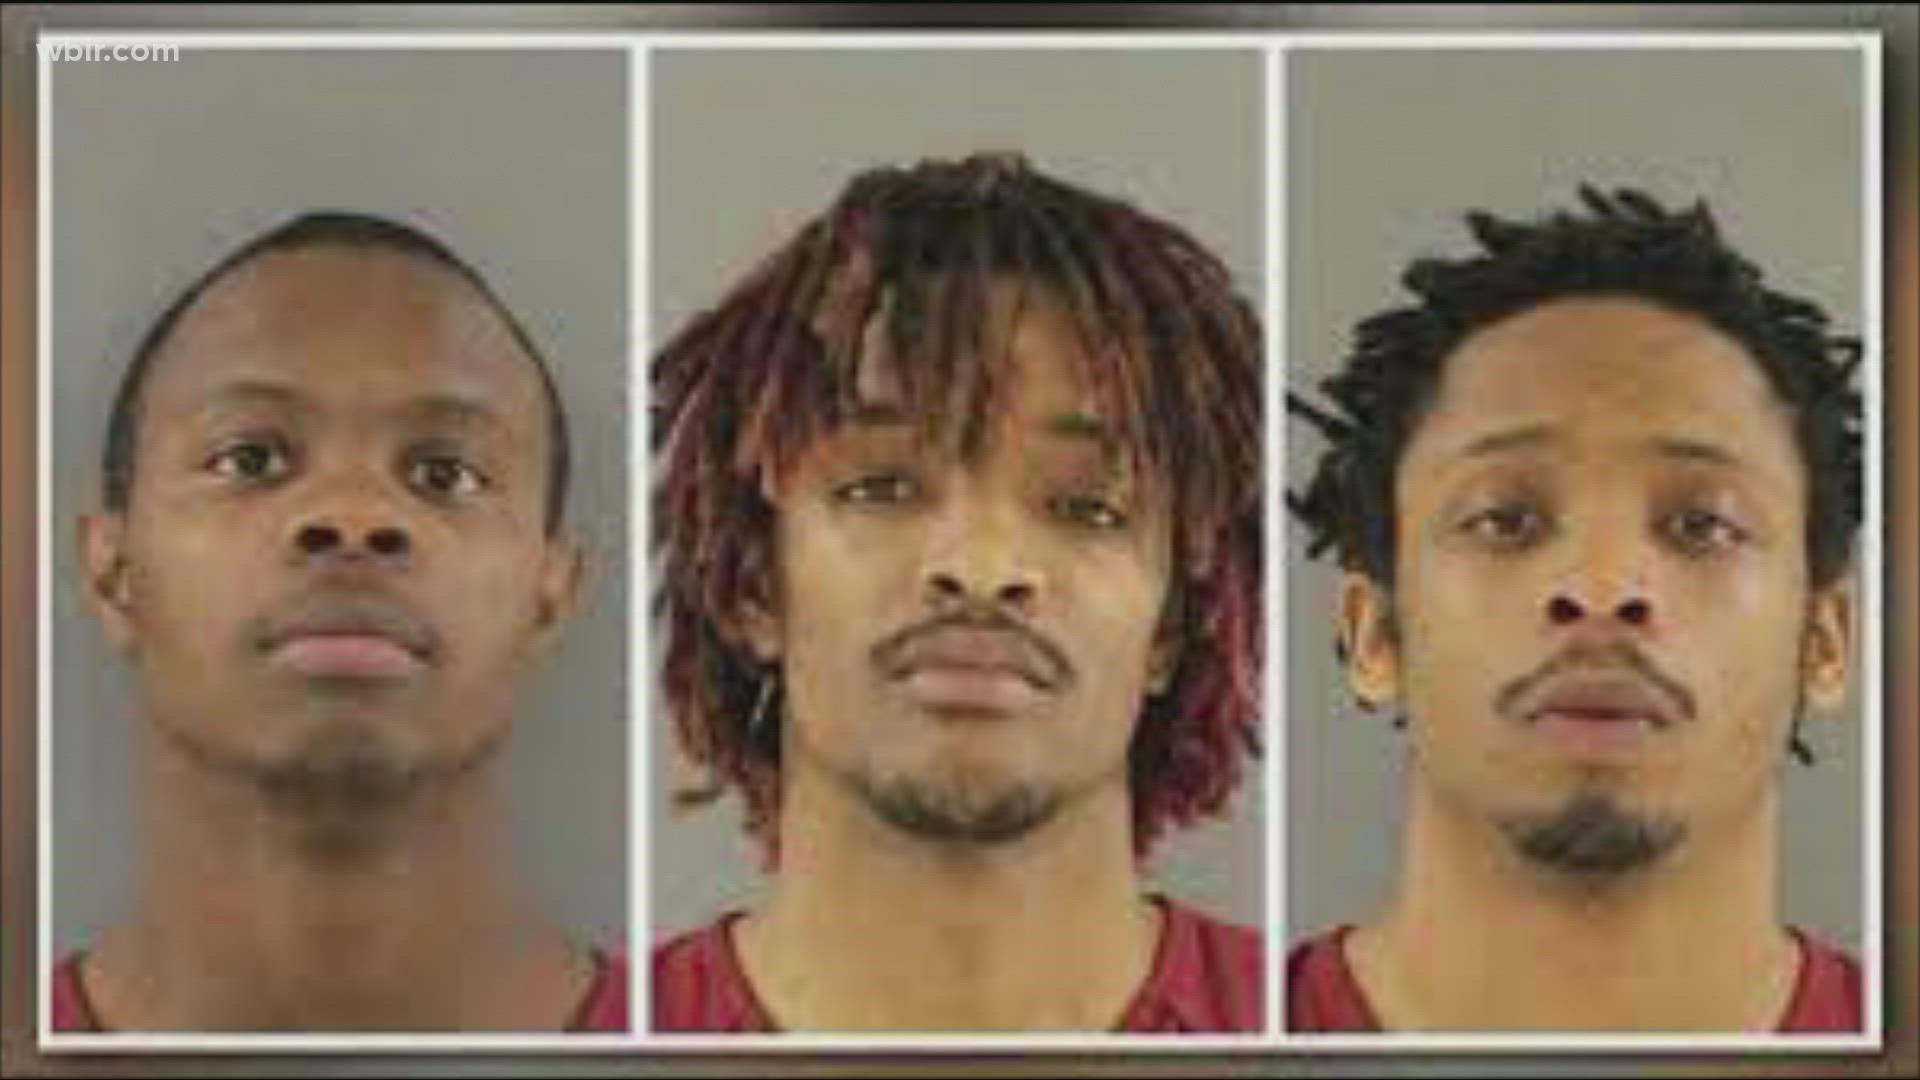 All of the defendants challenged the use of a YouTube rap video which prosecutors said showed gang ties.